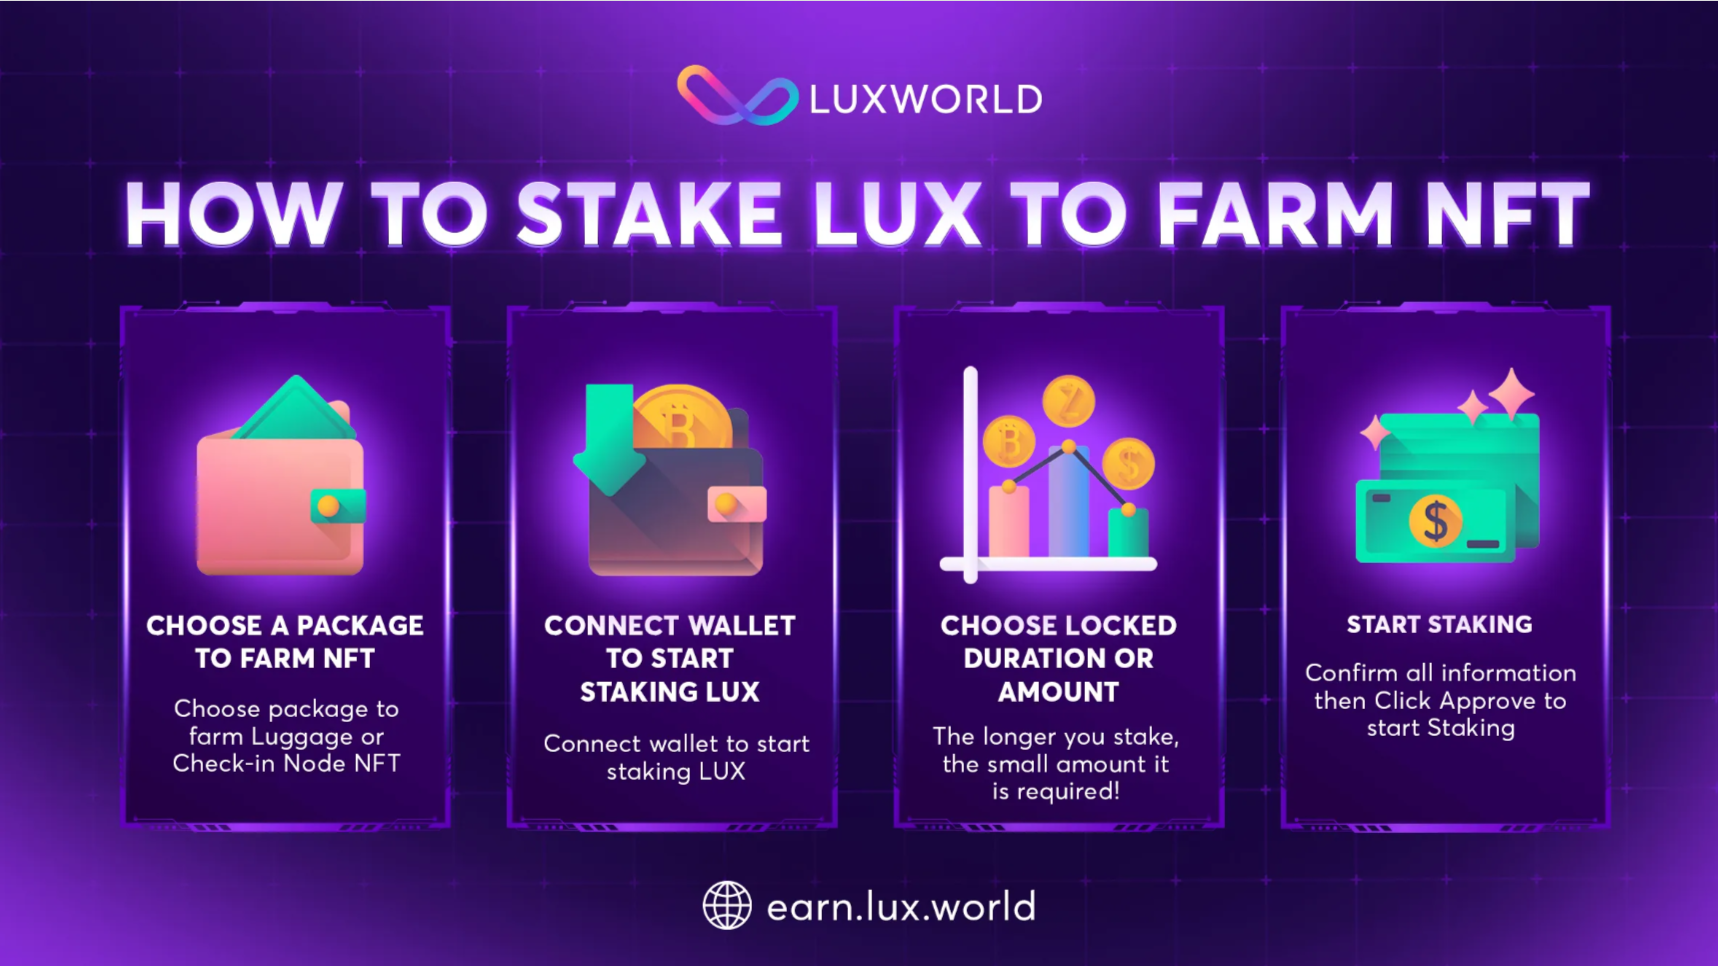 LuxWorld: How to stake LUX to farm NFT